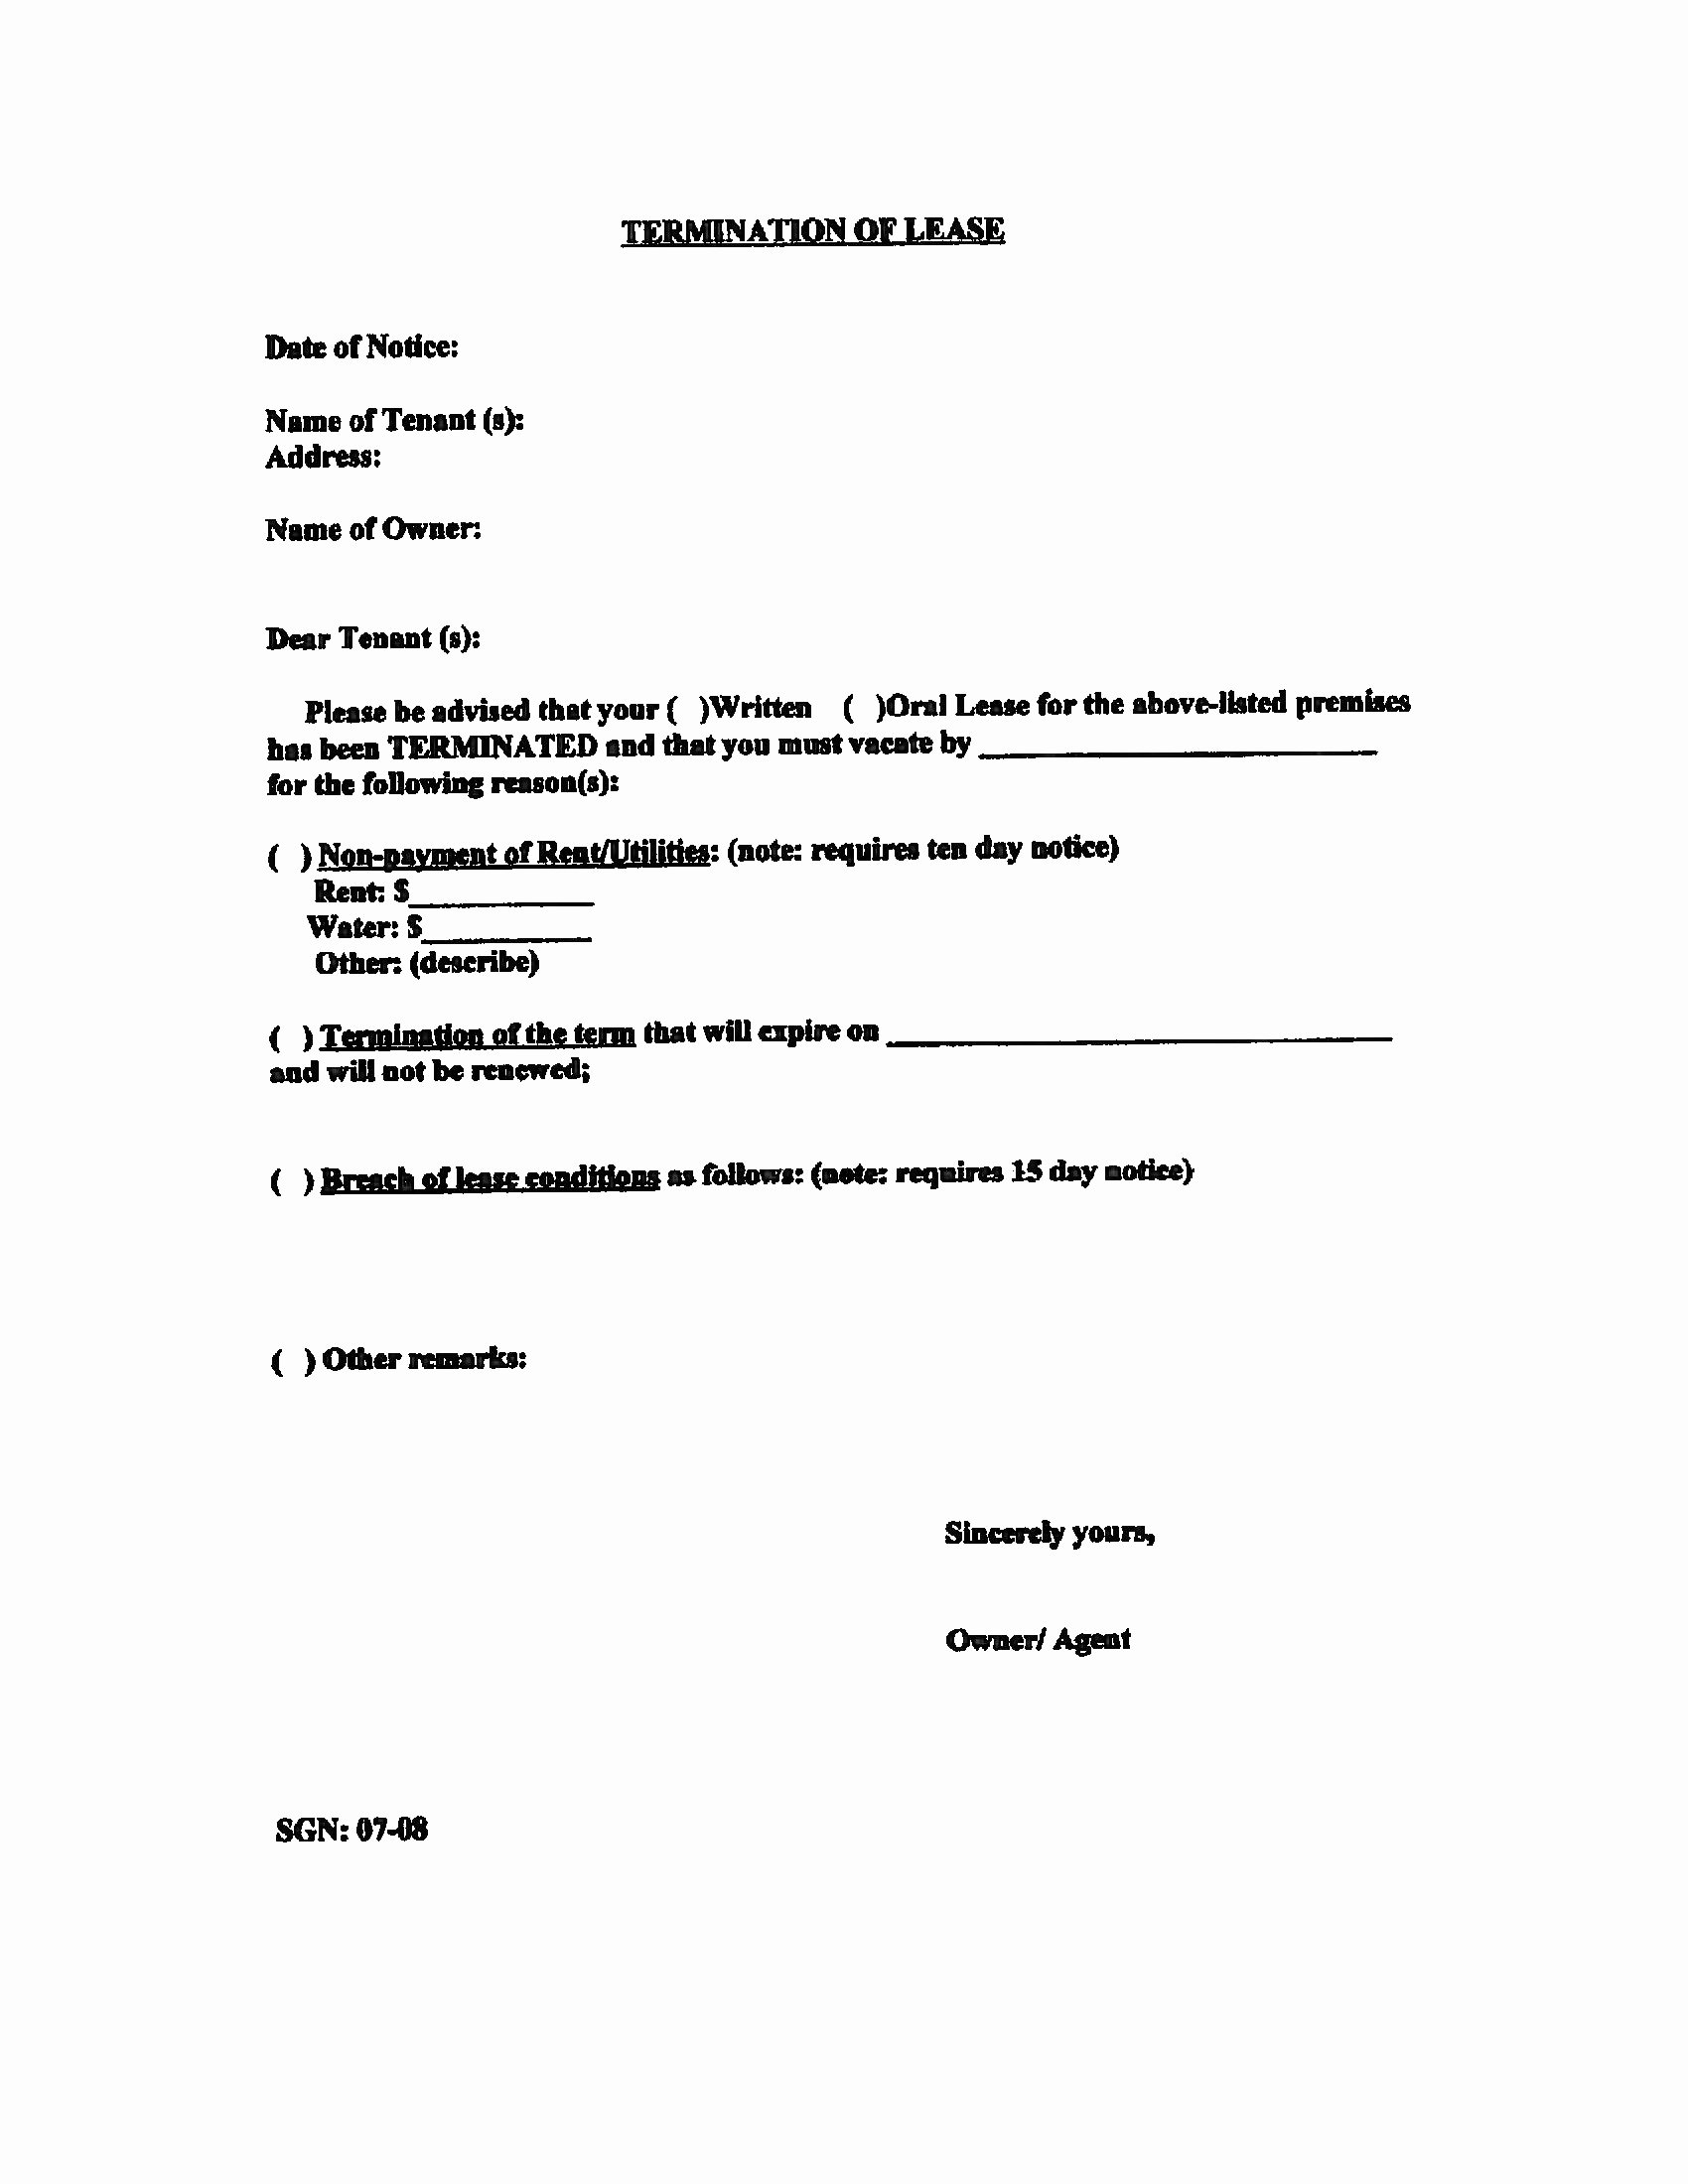 Sample Letter to Vacate New Notice Intent to Vacate Letter Template Collection